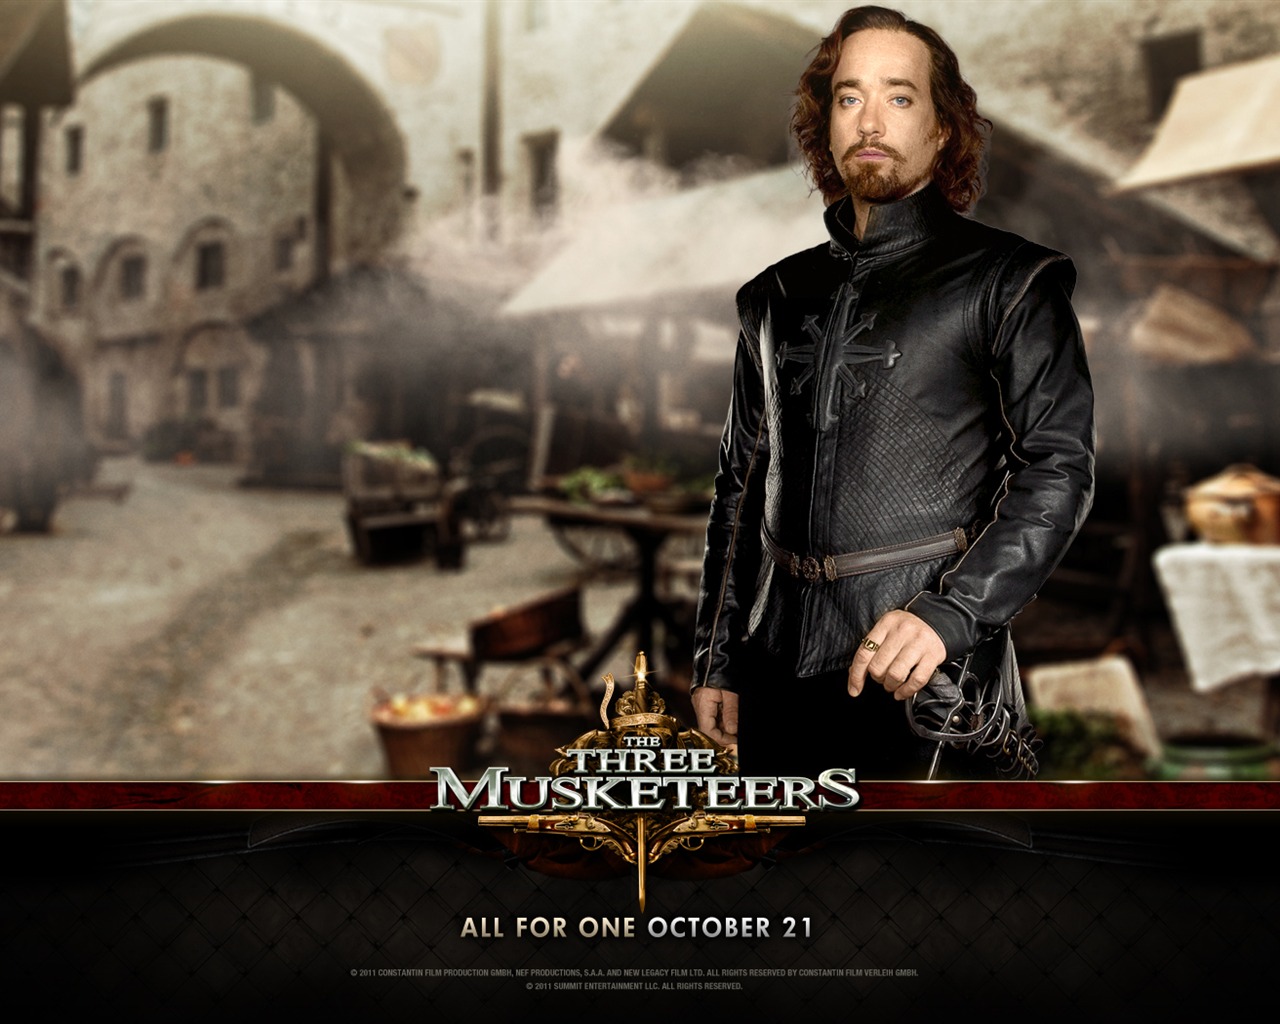 2011 The Three Musketeers wallpapers #10 - 1280x1024